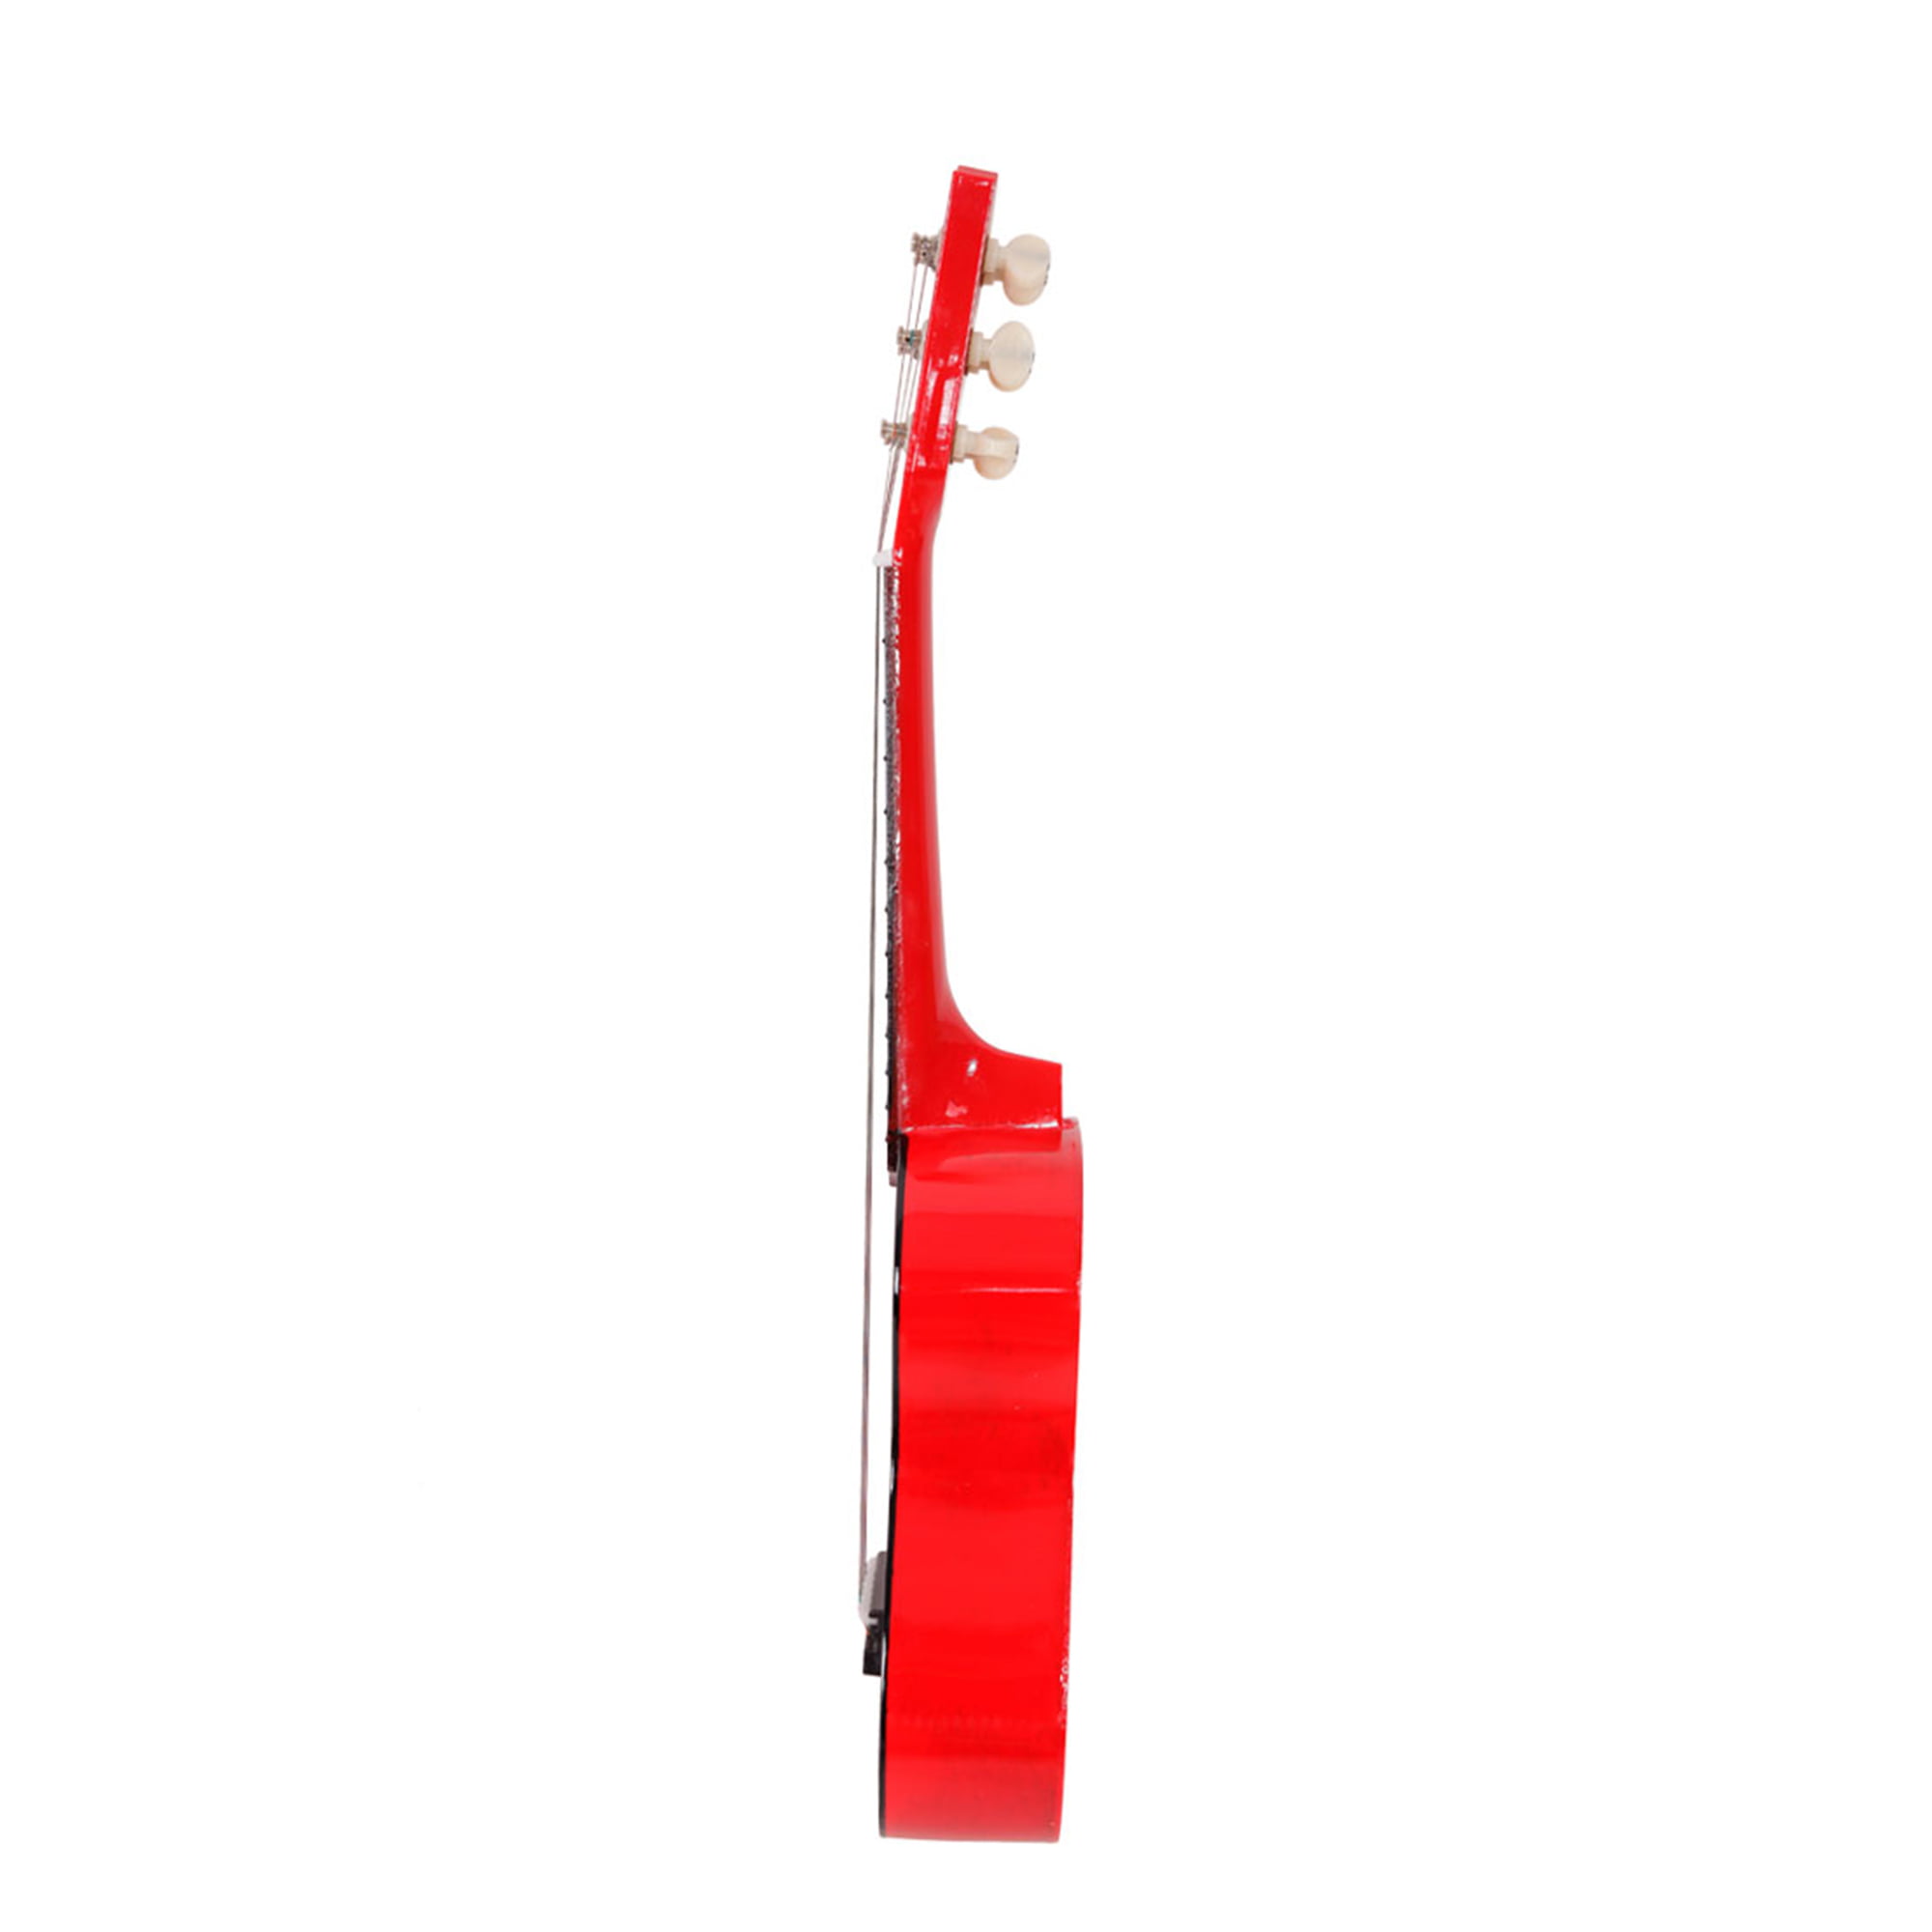 21inch Guitar Music Educational Toy Gift for Kids Children Guitar Stringed Instrument with one Pick and a String Red Brown